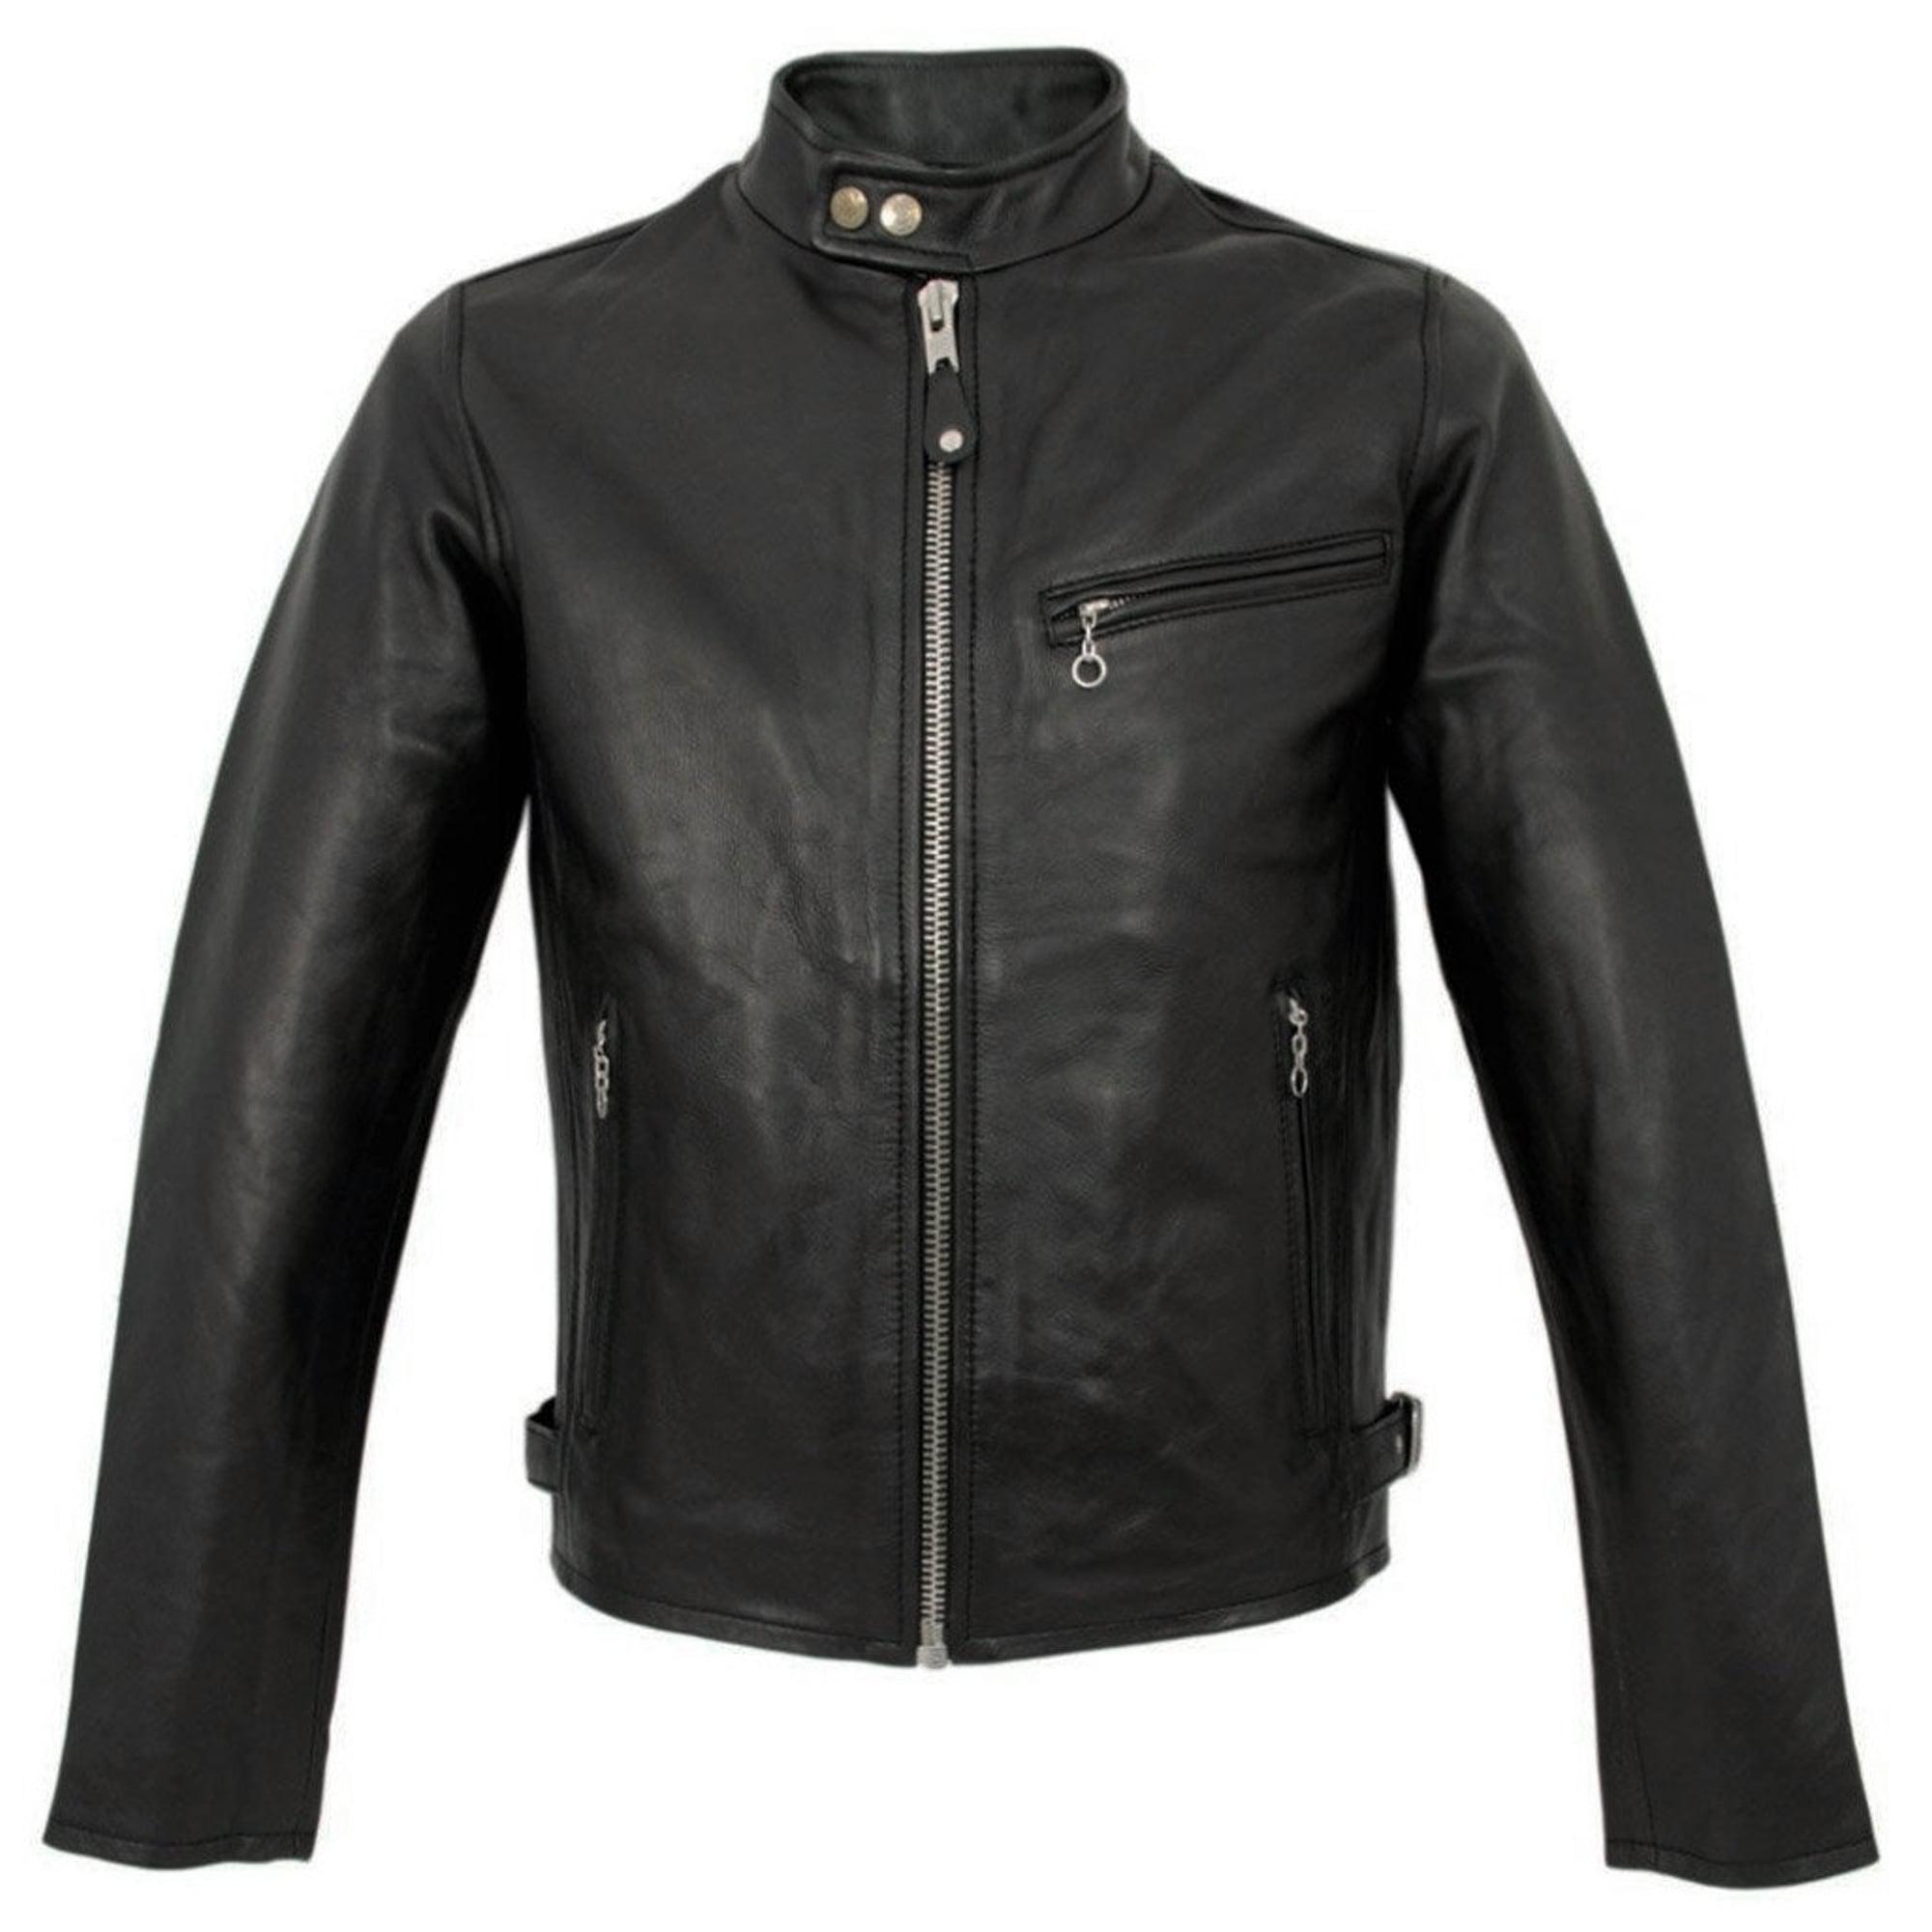 Schott Nyc Classic Racer Black Leather Jacket in Black for Men - Save ...